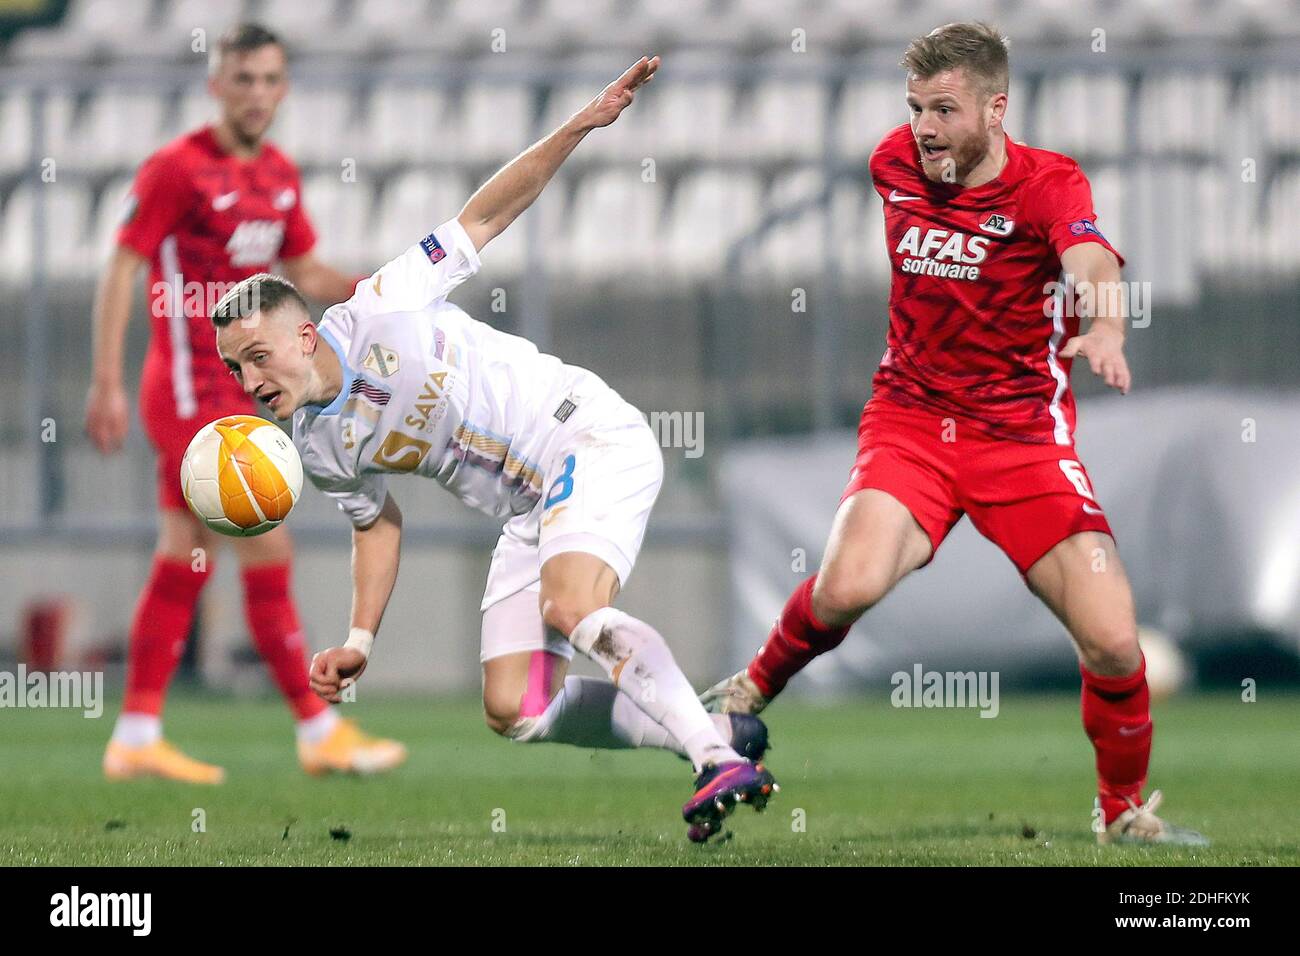 Alen Halilovic of HNK Rijeka in action during the 1st leg of